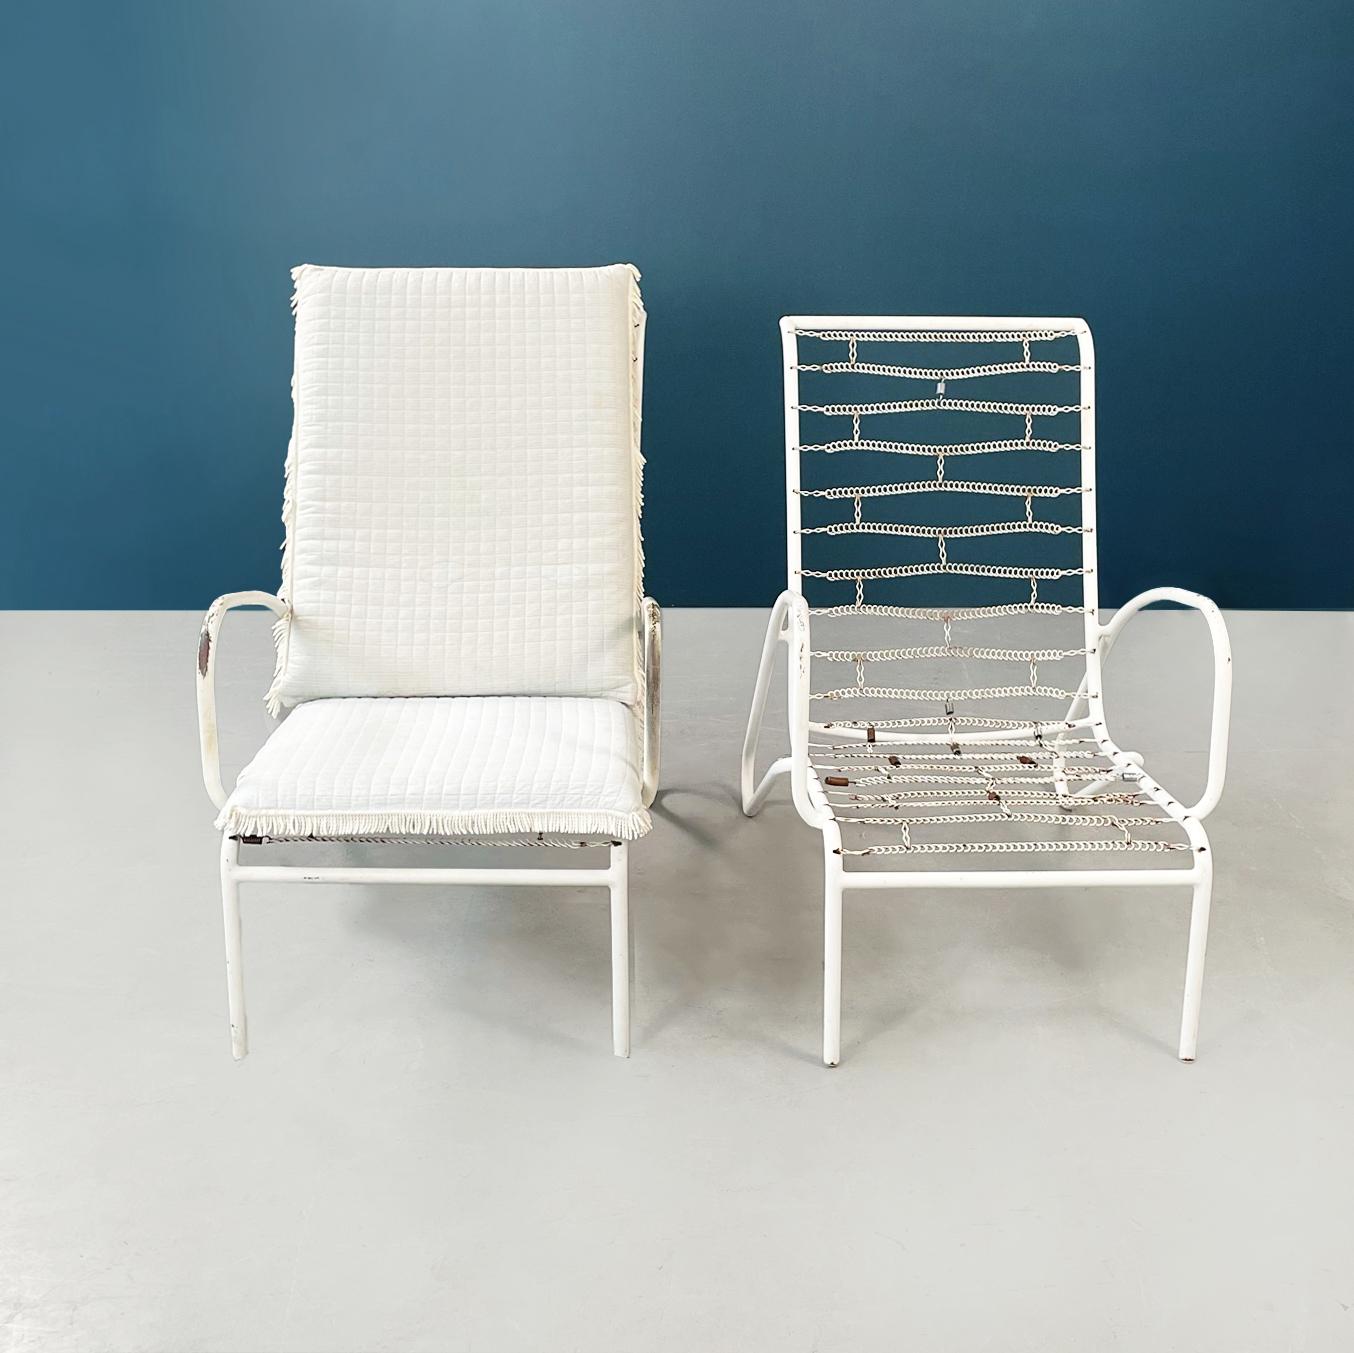 Italian mid-century White iron garden armchairs with fabric cushions, 1960s
Pair of garden armchairs in white painted iron. The structure is in tubular with a series of intertwined springs on the seat and back, on which are placed two quilted